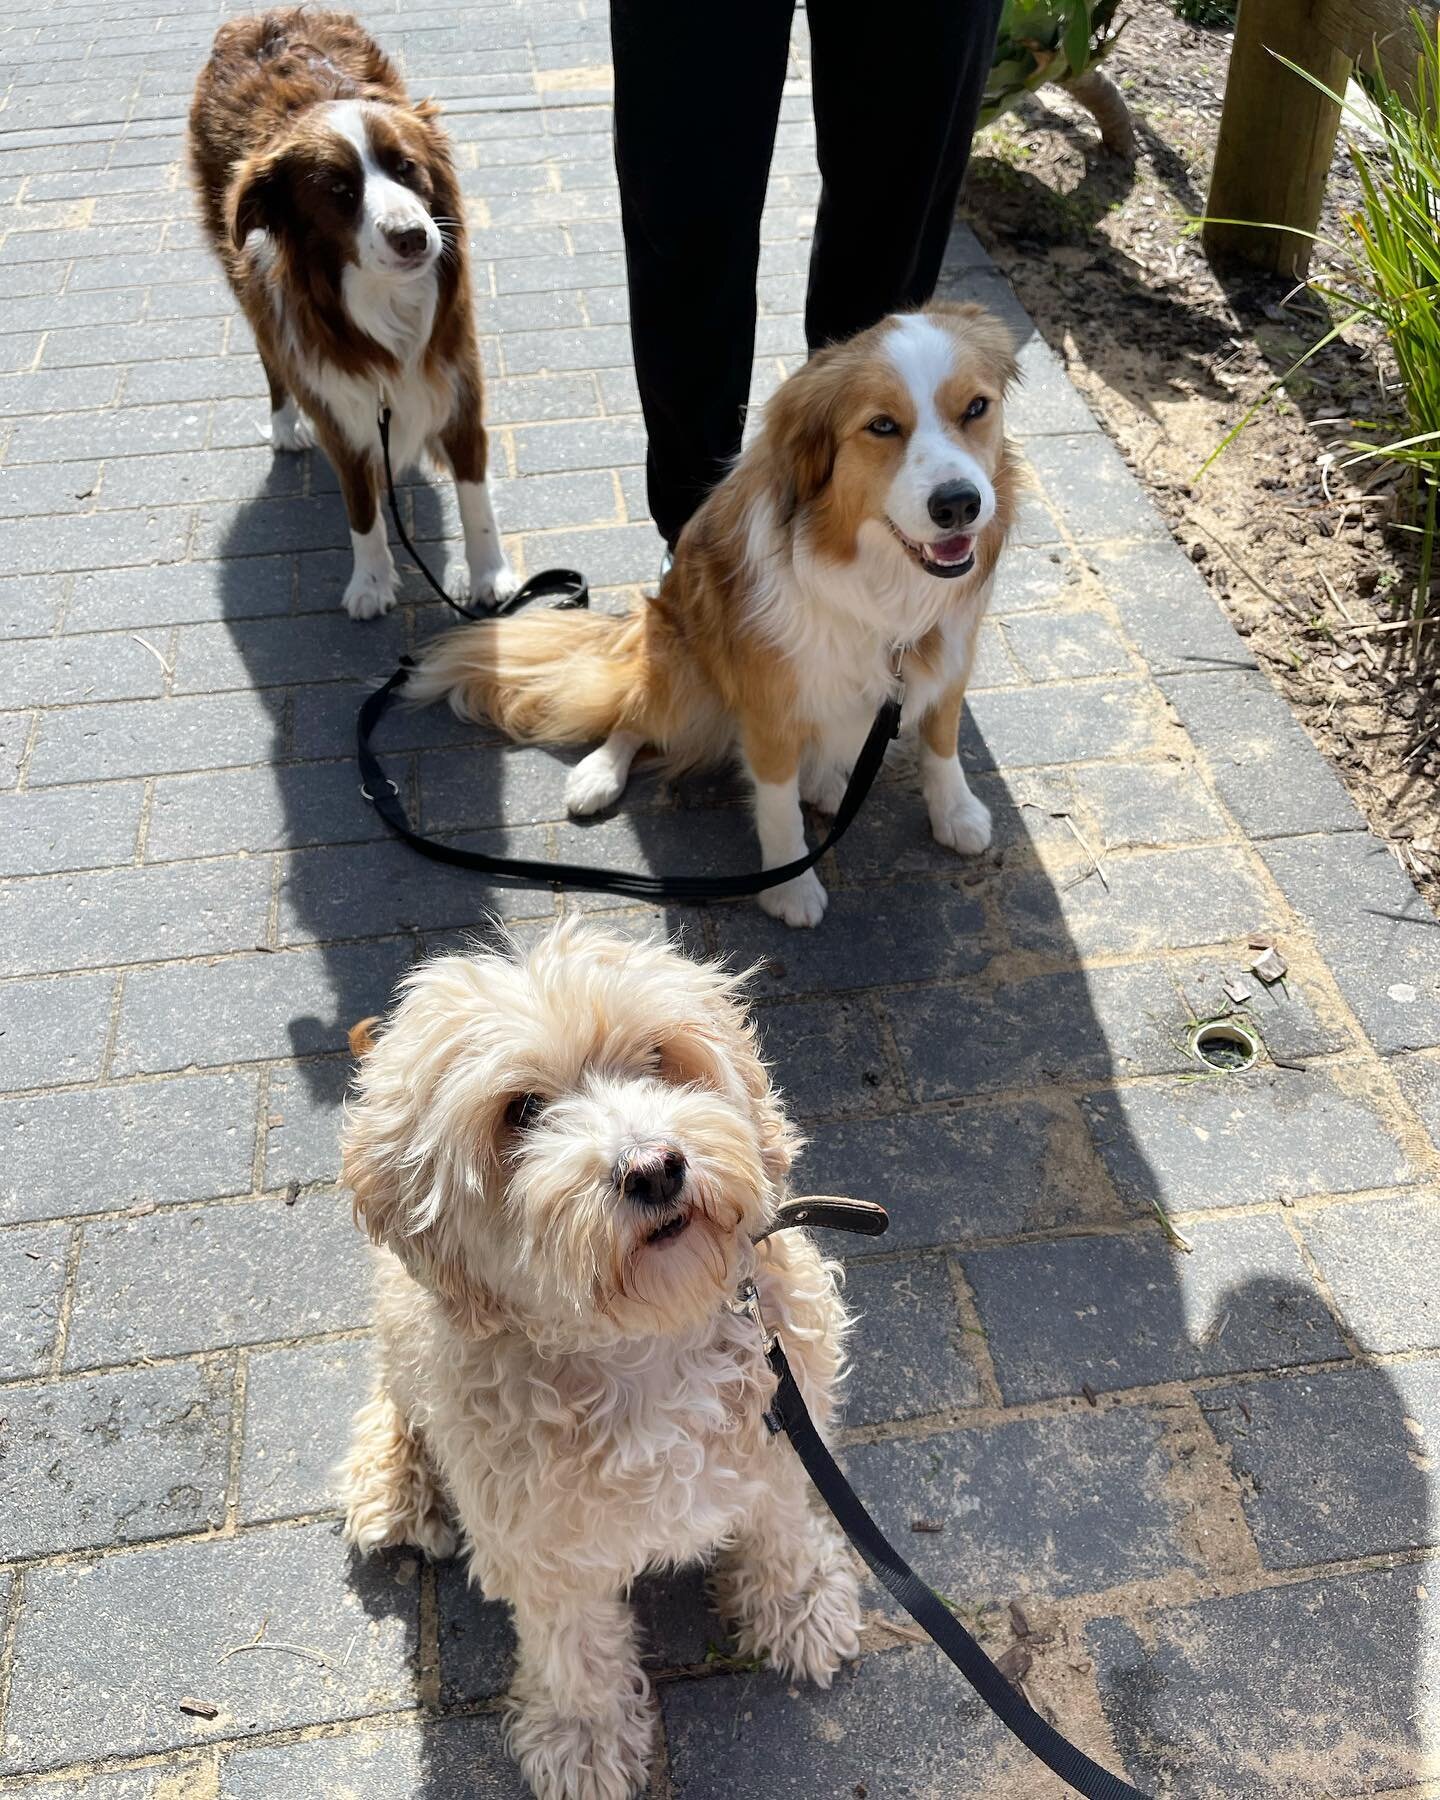 We took lilo and the girls for a lockdown walk for a coffee at the beach, no masks no social distancing🤦&zwj;♂️@toowoonbayhouse

#dogsofcharltonstreet #dogsoftoowoonbay #mydoglovescoffee #dogfriends